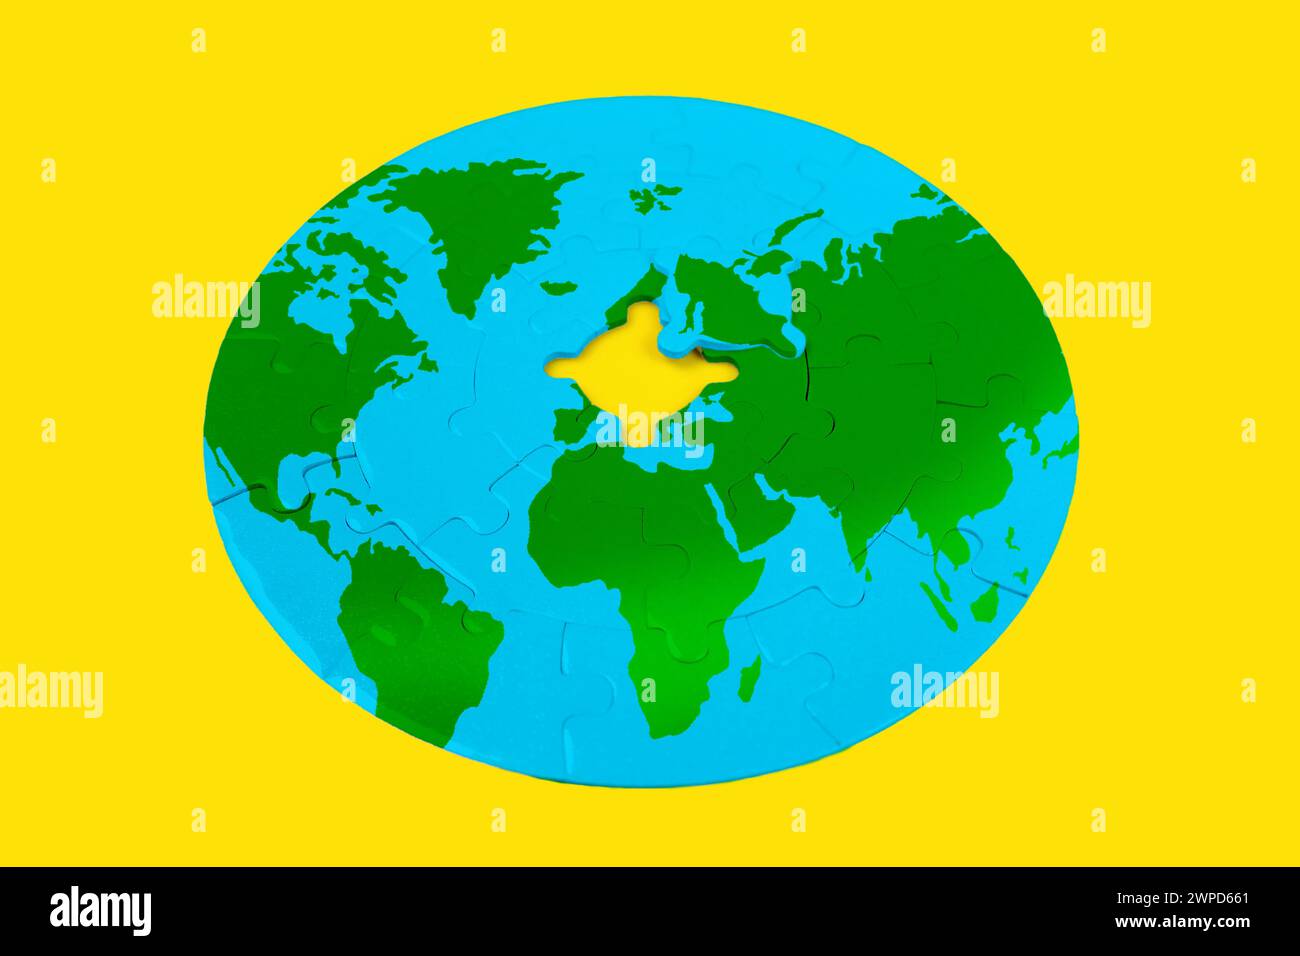 Round jigsaw puzzle depicts a world map with green continents and blue oceans on a yellow background. The puzzle is incomplete, with one piece missing Stock Photo